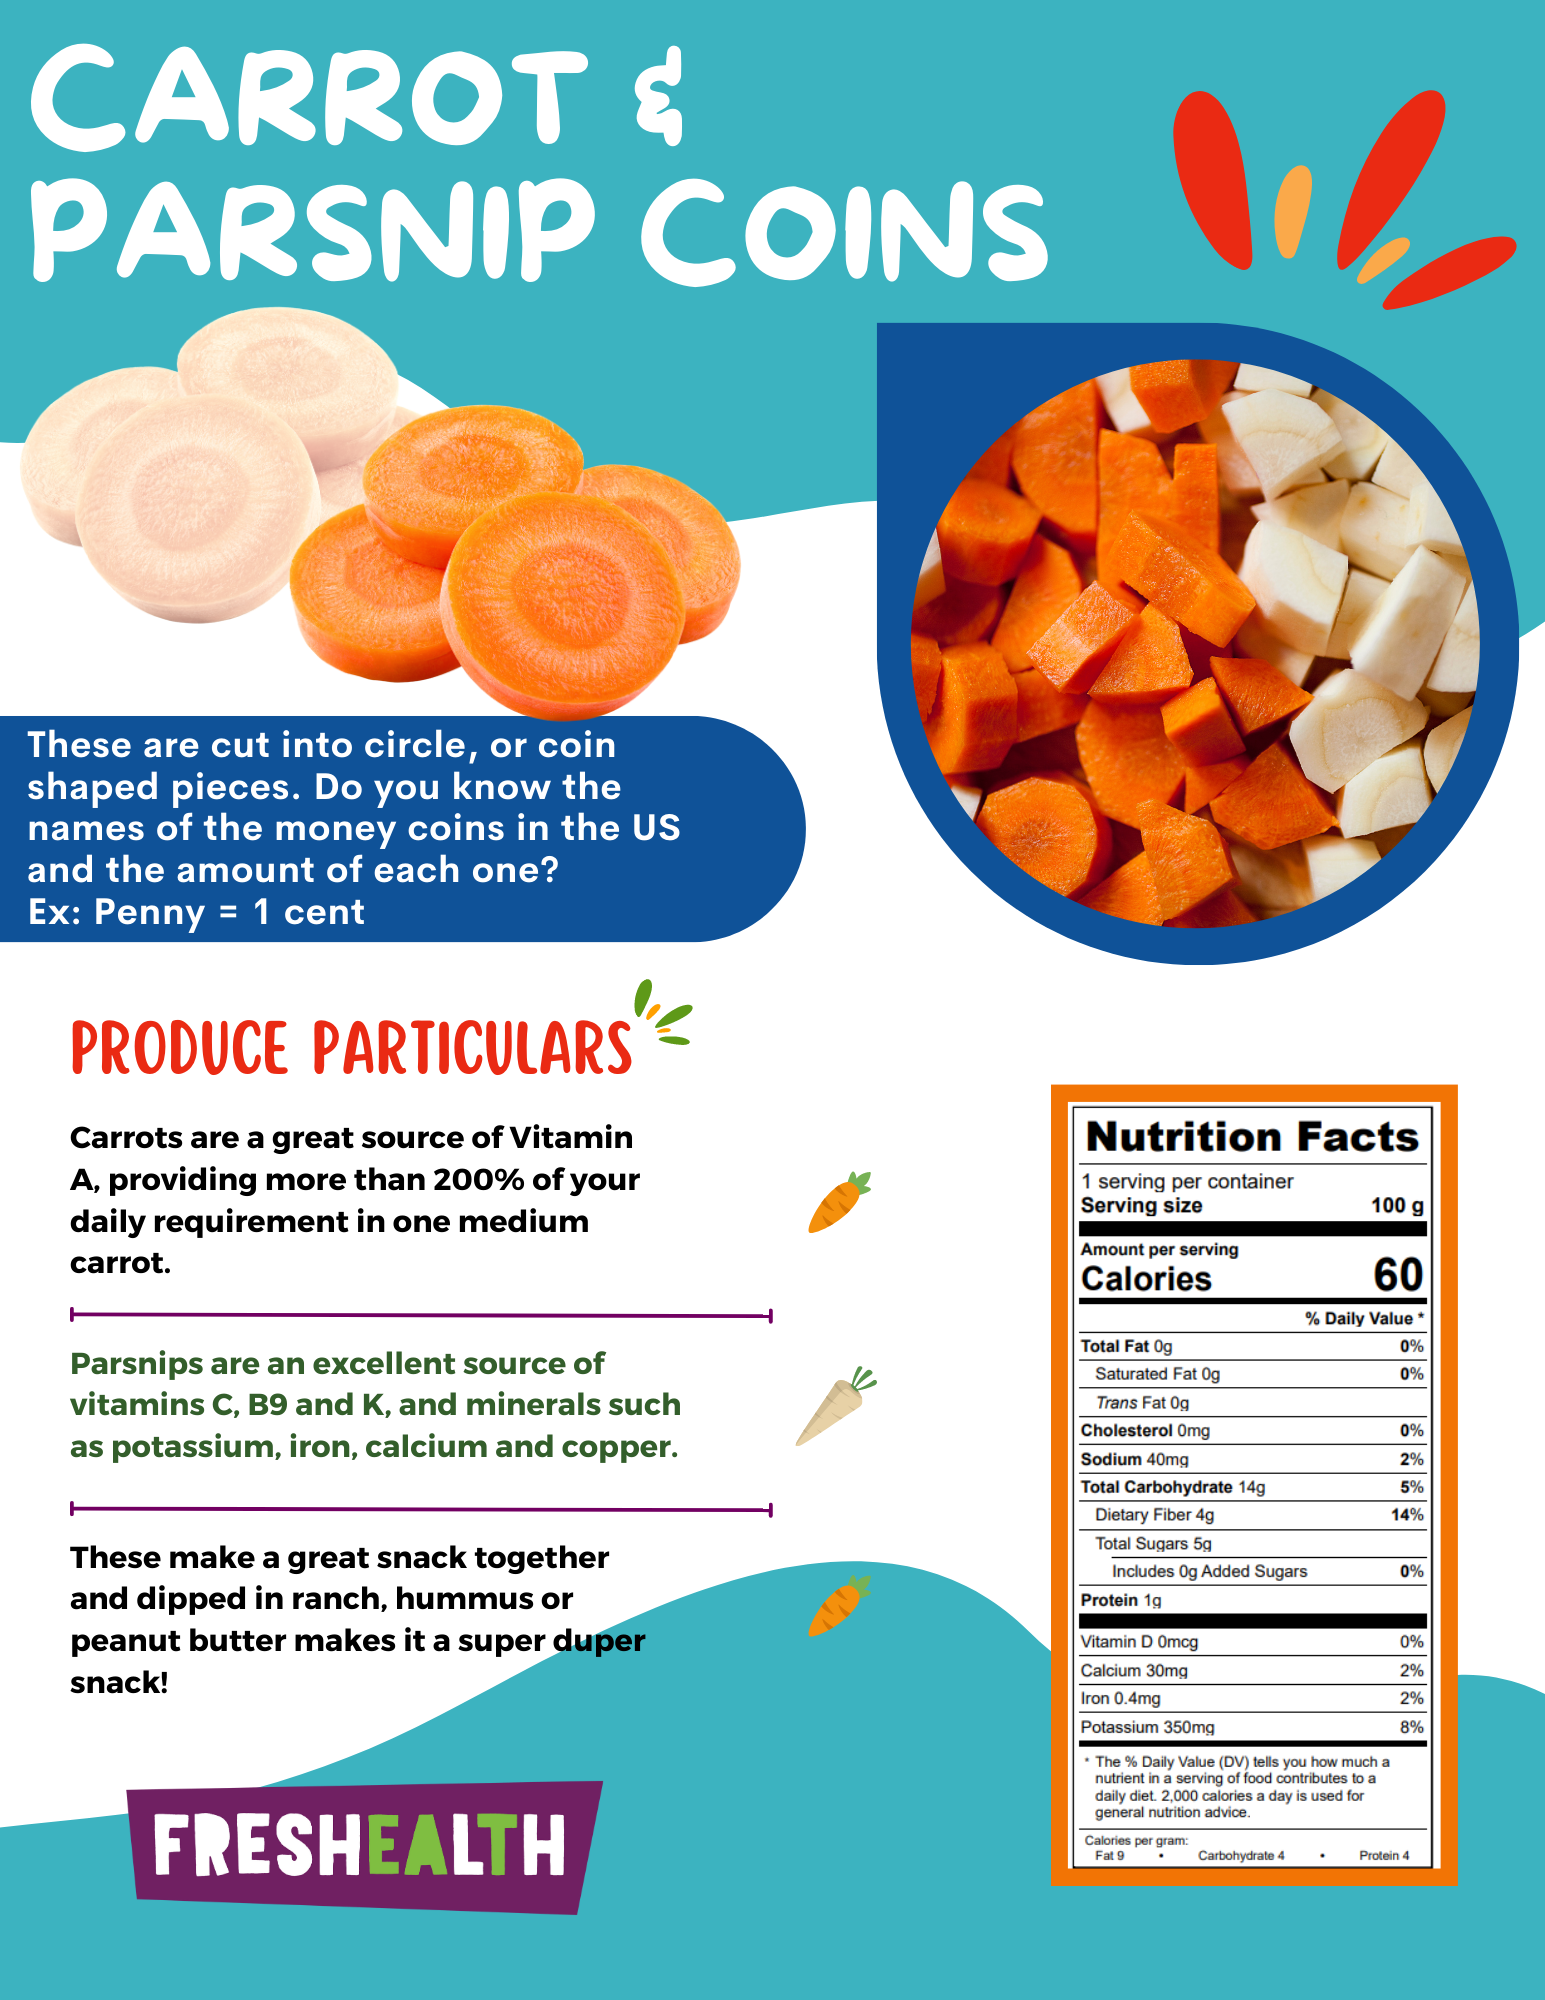 Carrot & Parsnip Coins.png